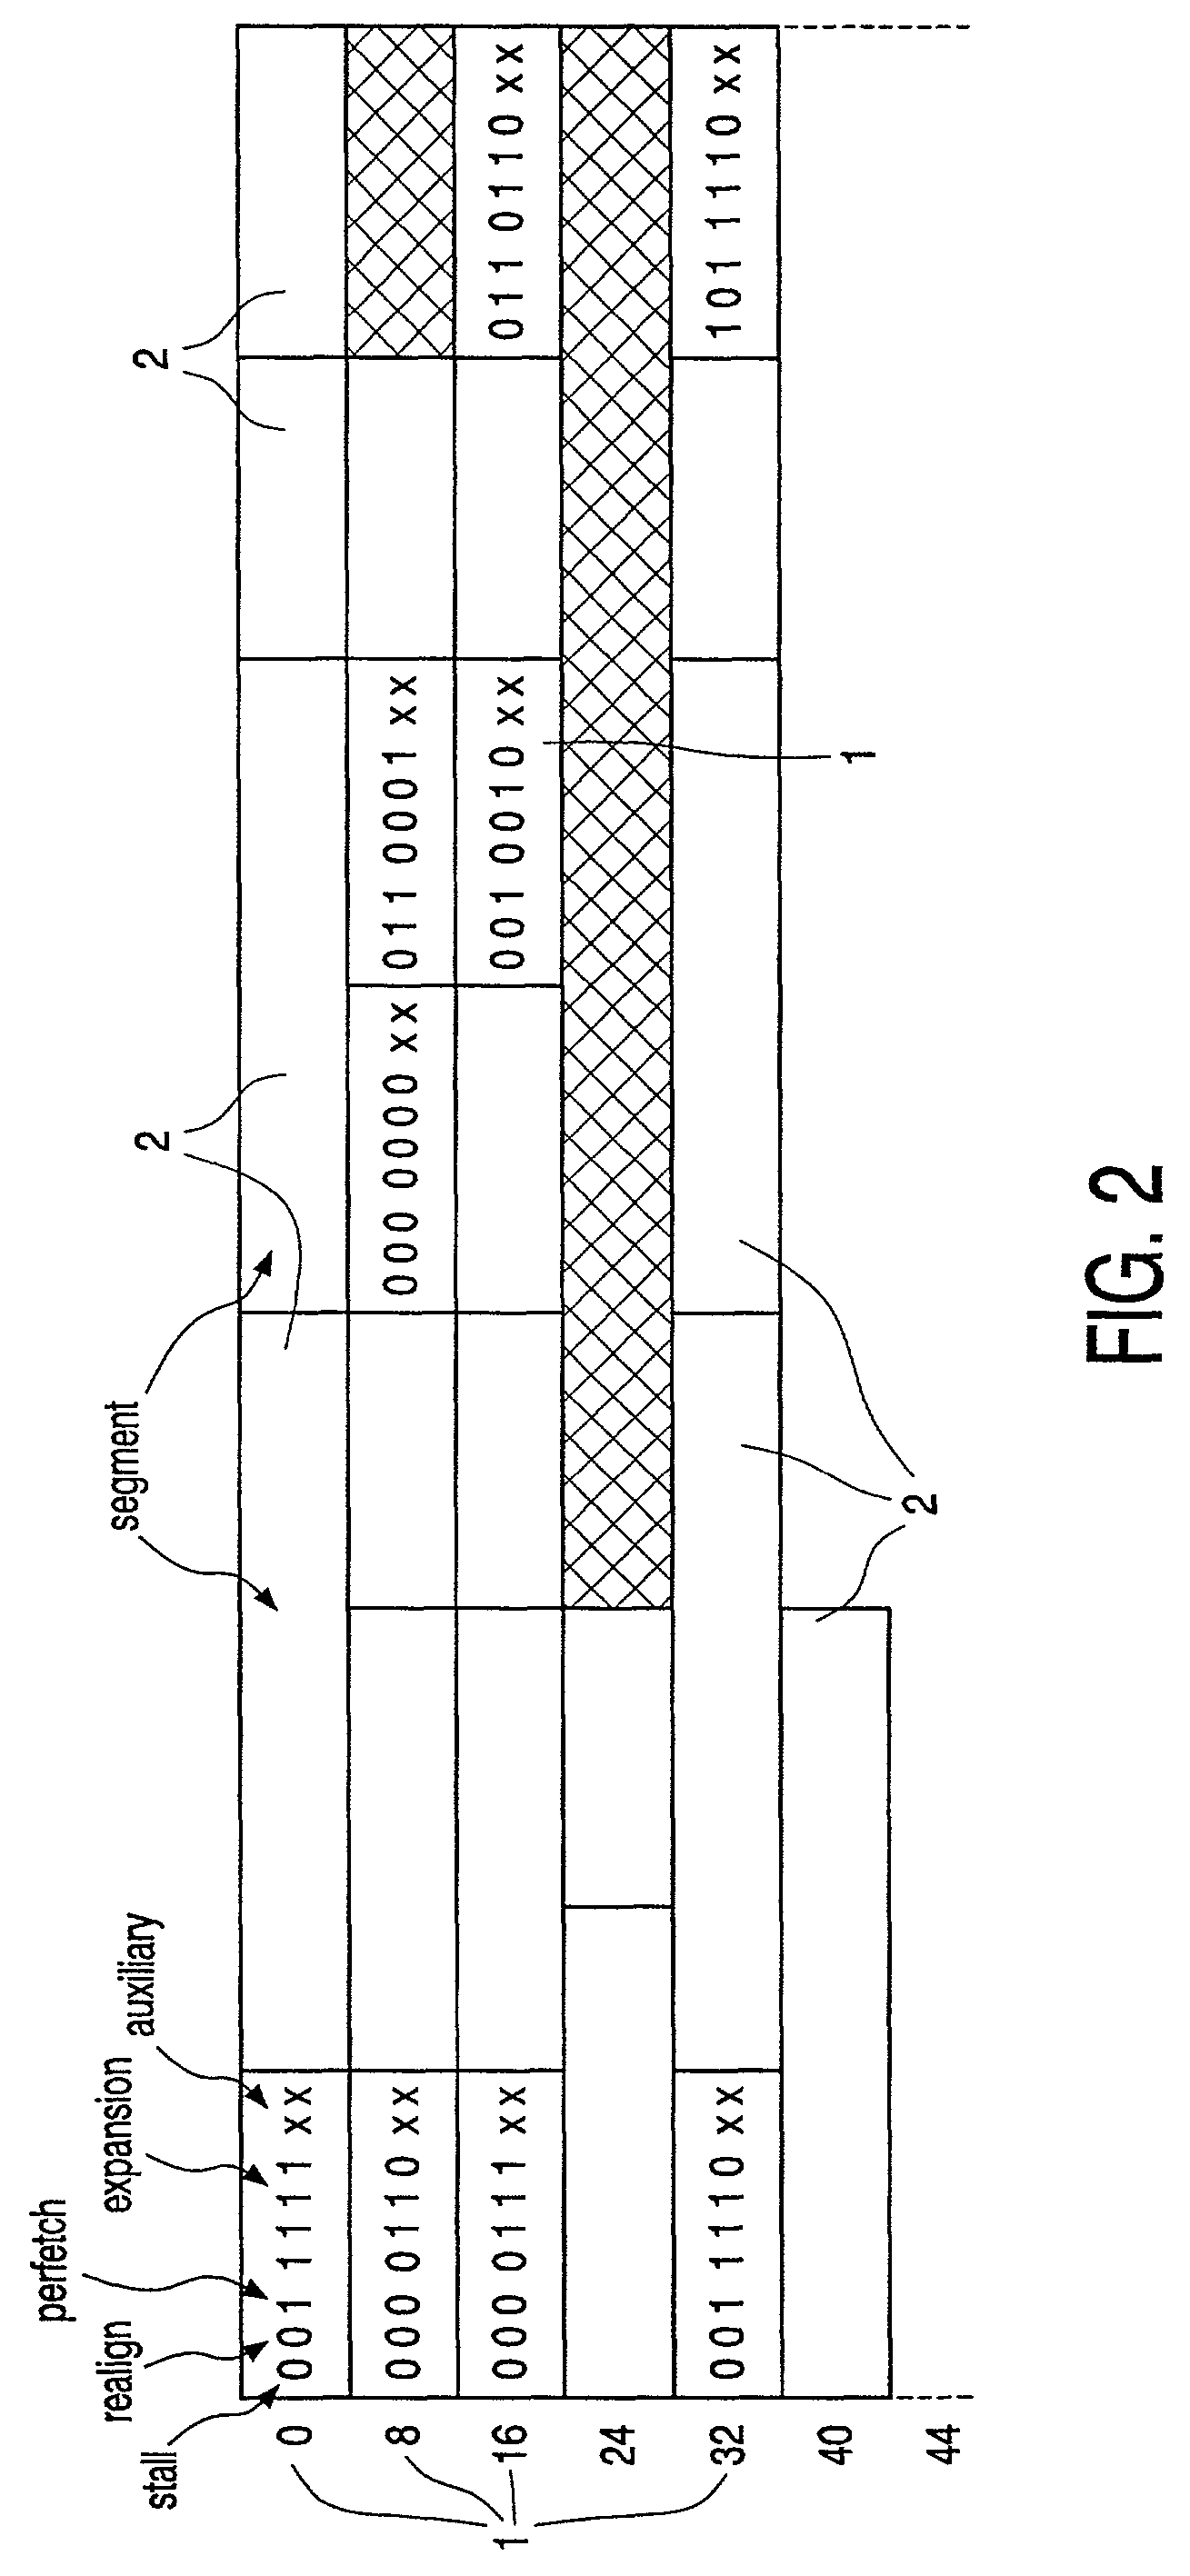 Variable length VLIW instruction with instruction fetch control bits for prefetching, stalling, or realigning in order to handle padding bits and instructions that cross memory line boundaries